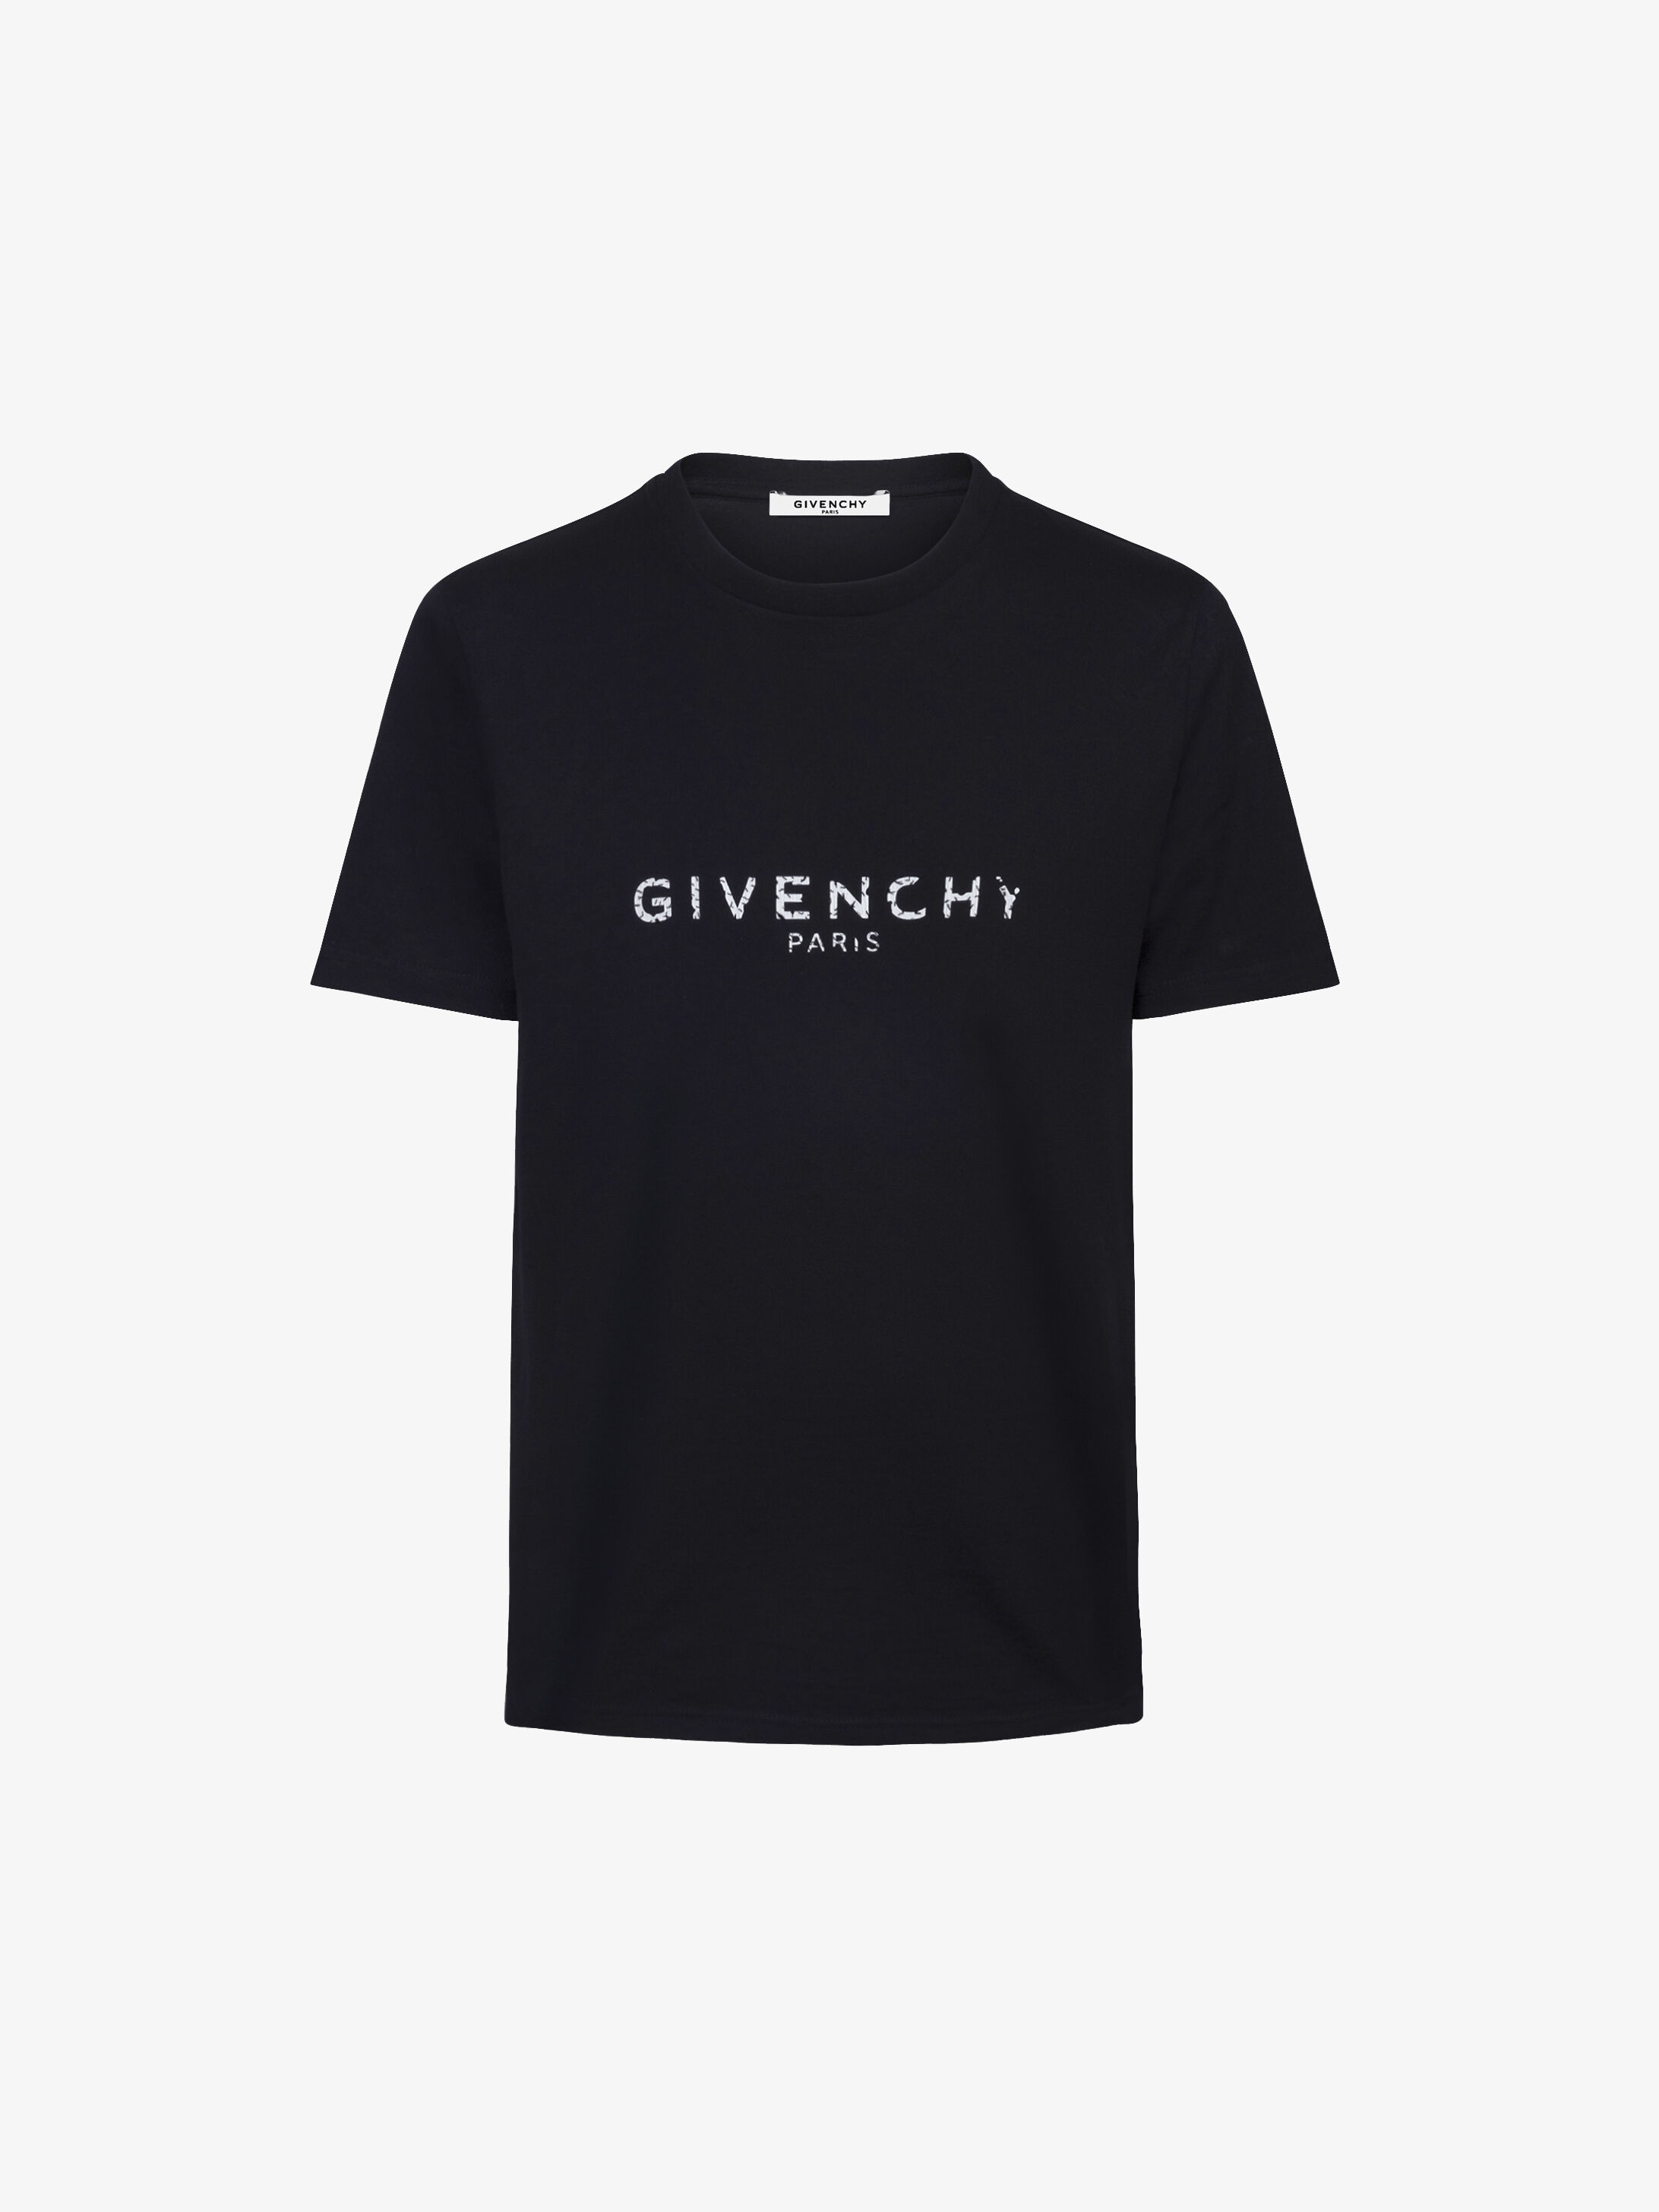 givenchy t shirt fit